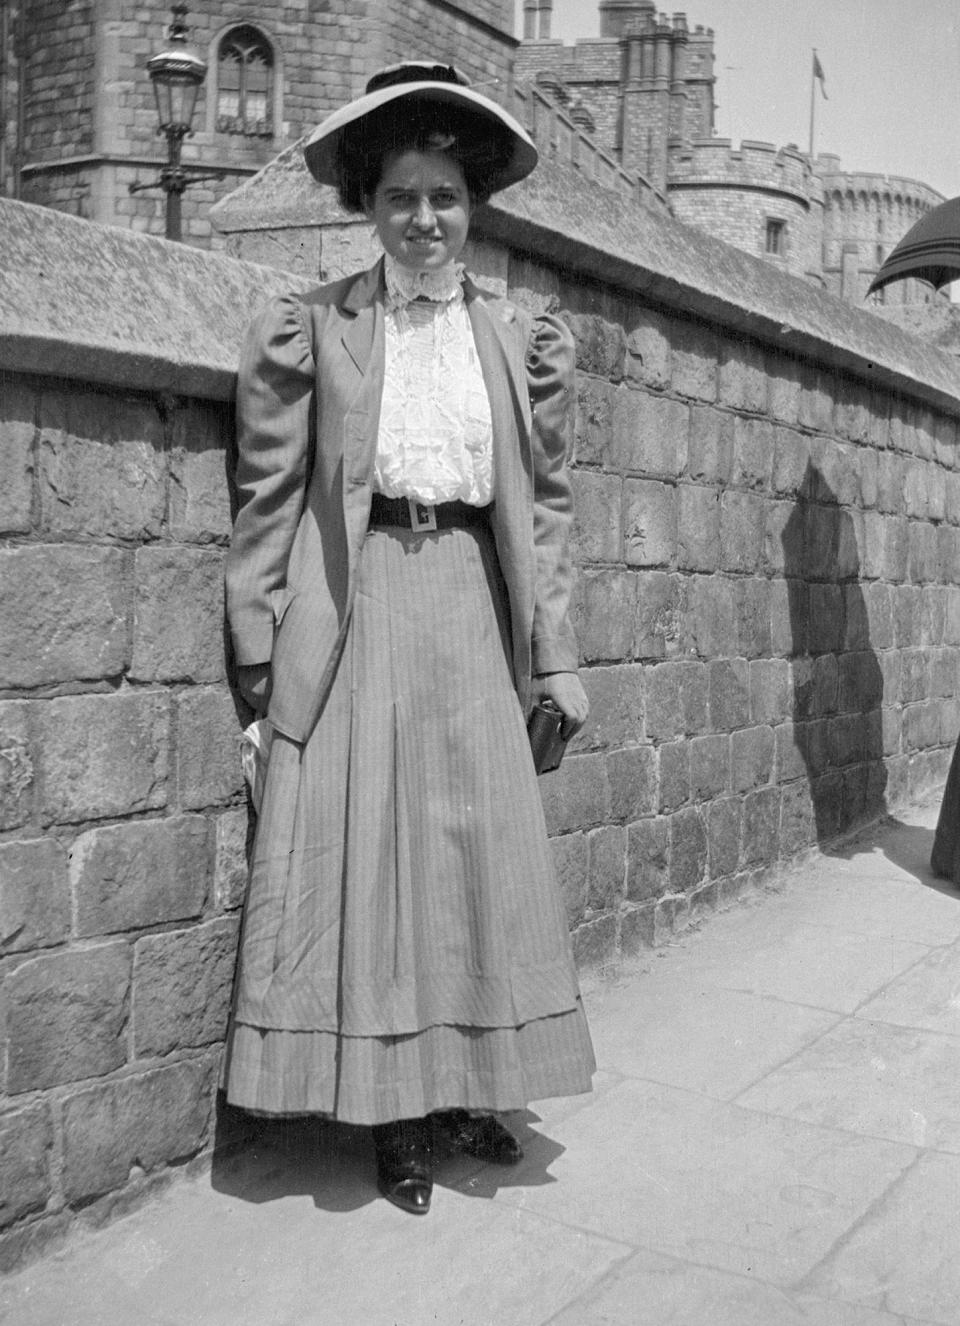 In this 1908 photo provided by the Kennedy Family Collection, courtesy of the John F. Kennedy Library Foundation, Rose Fitzgerald poses at Windsor Castle in Windsor, Berkshire, England. The Boston-based museum completed an 18-month project in 2018 to catalog and digitize more than 1,700 black-and-white Kennedy family snapshots that are viewable online, giving a nation still obsessed with "Camelot" a candid new glimpse into their everyday lives. (Kennedy Family Collection/John F. Kennedy Library Foundation via AP)